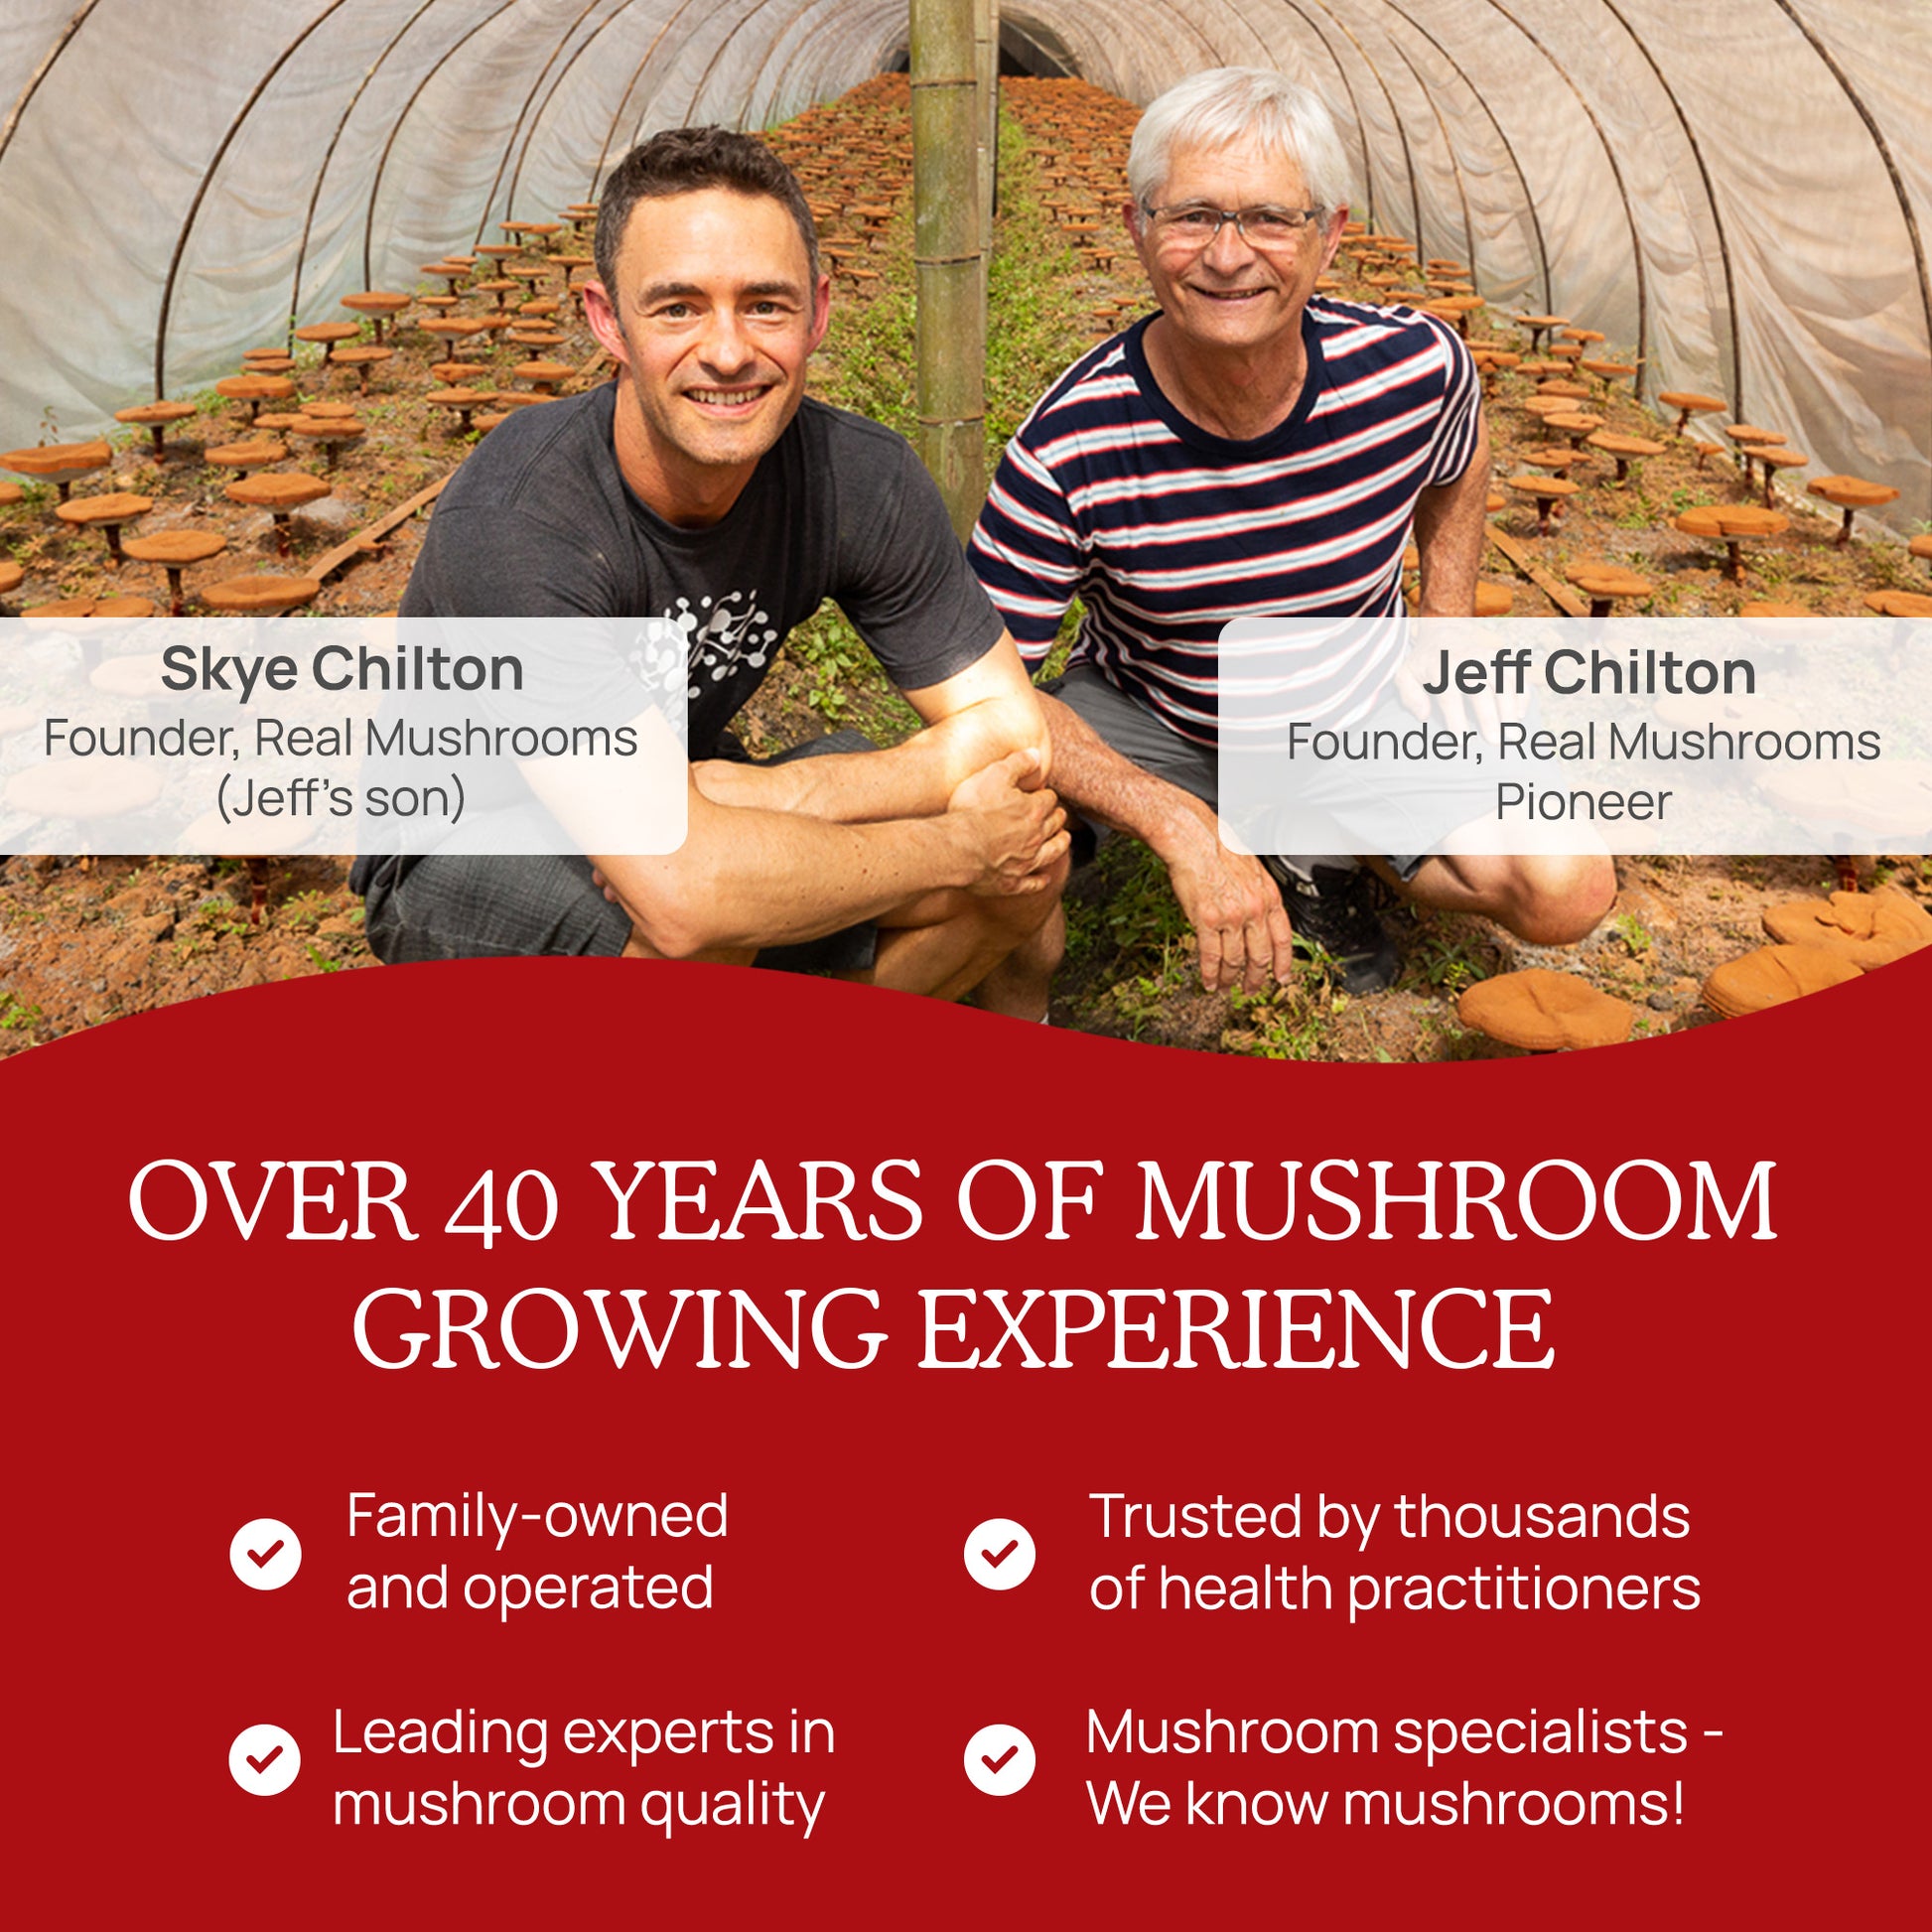 Promotional image highlighting the experience and trustworthiness of Real Mushrooms, a family-owned mushroom growing business specializing in Lion's Mane, Ashwagandha, Rhodiola and Bacopa, featuring two male founders in a greenhouse setting with a list of their qualifications and expertise.